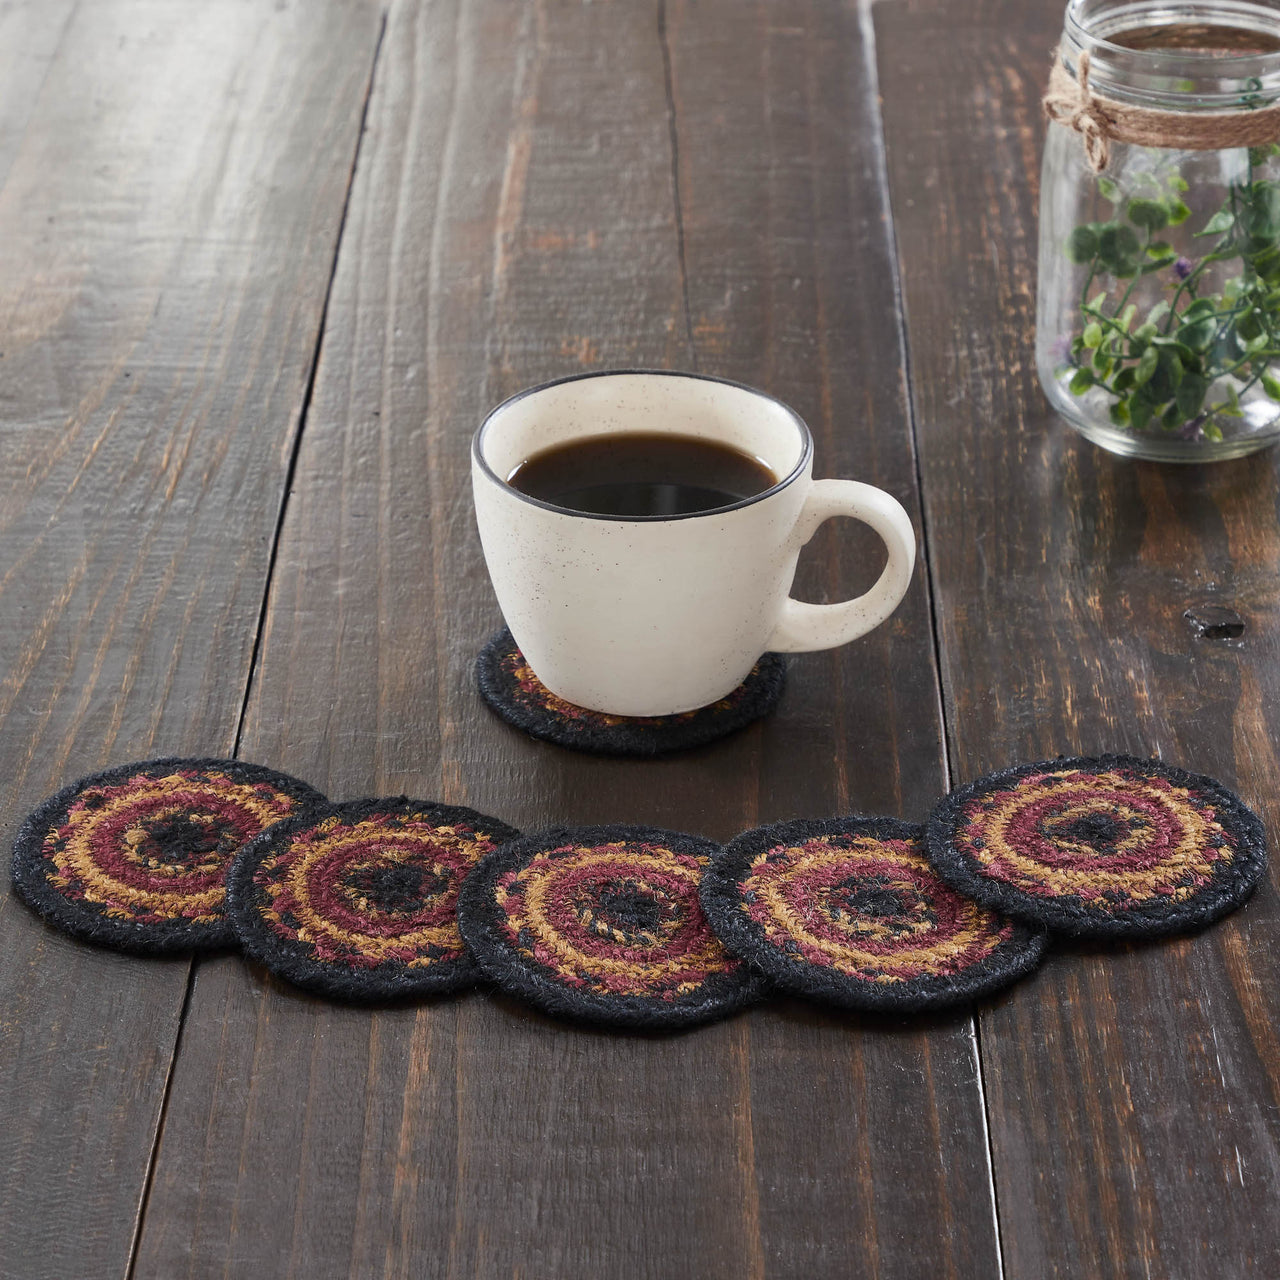 Heritage Farms Jute Coaster Set of 6 VHC Brands